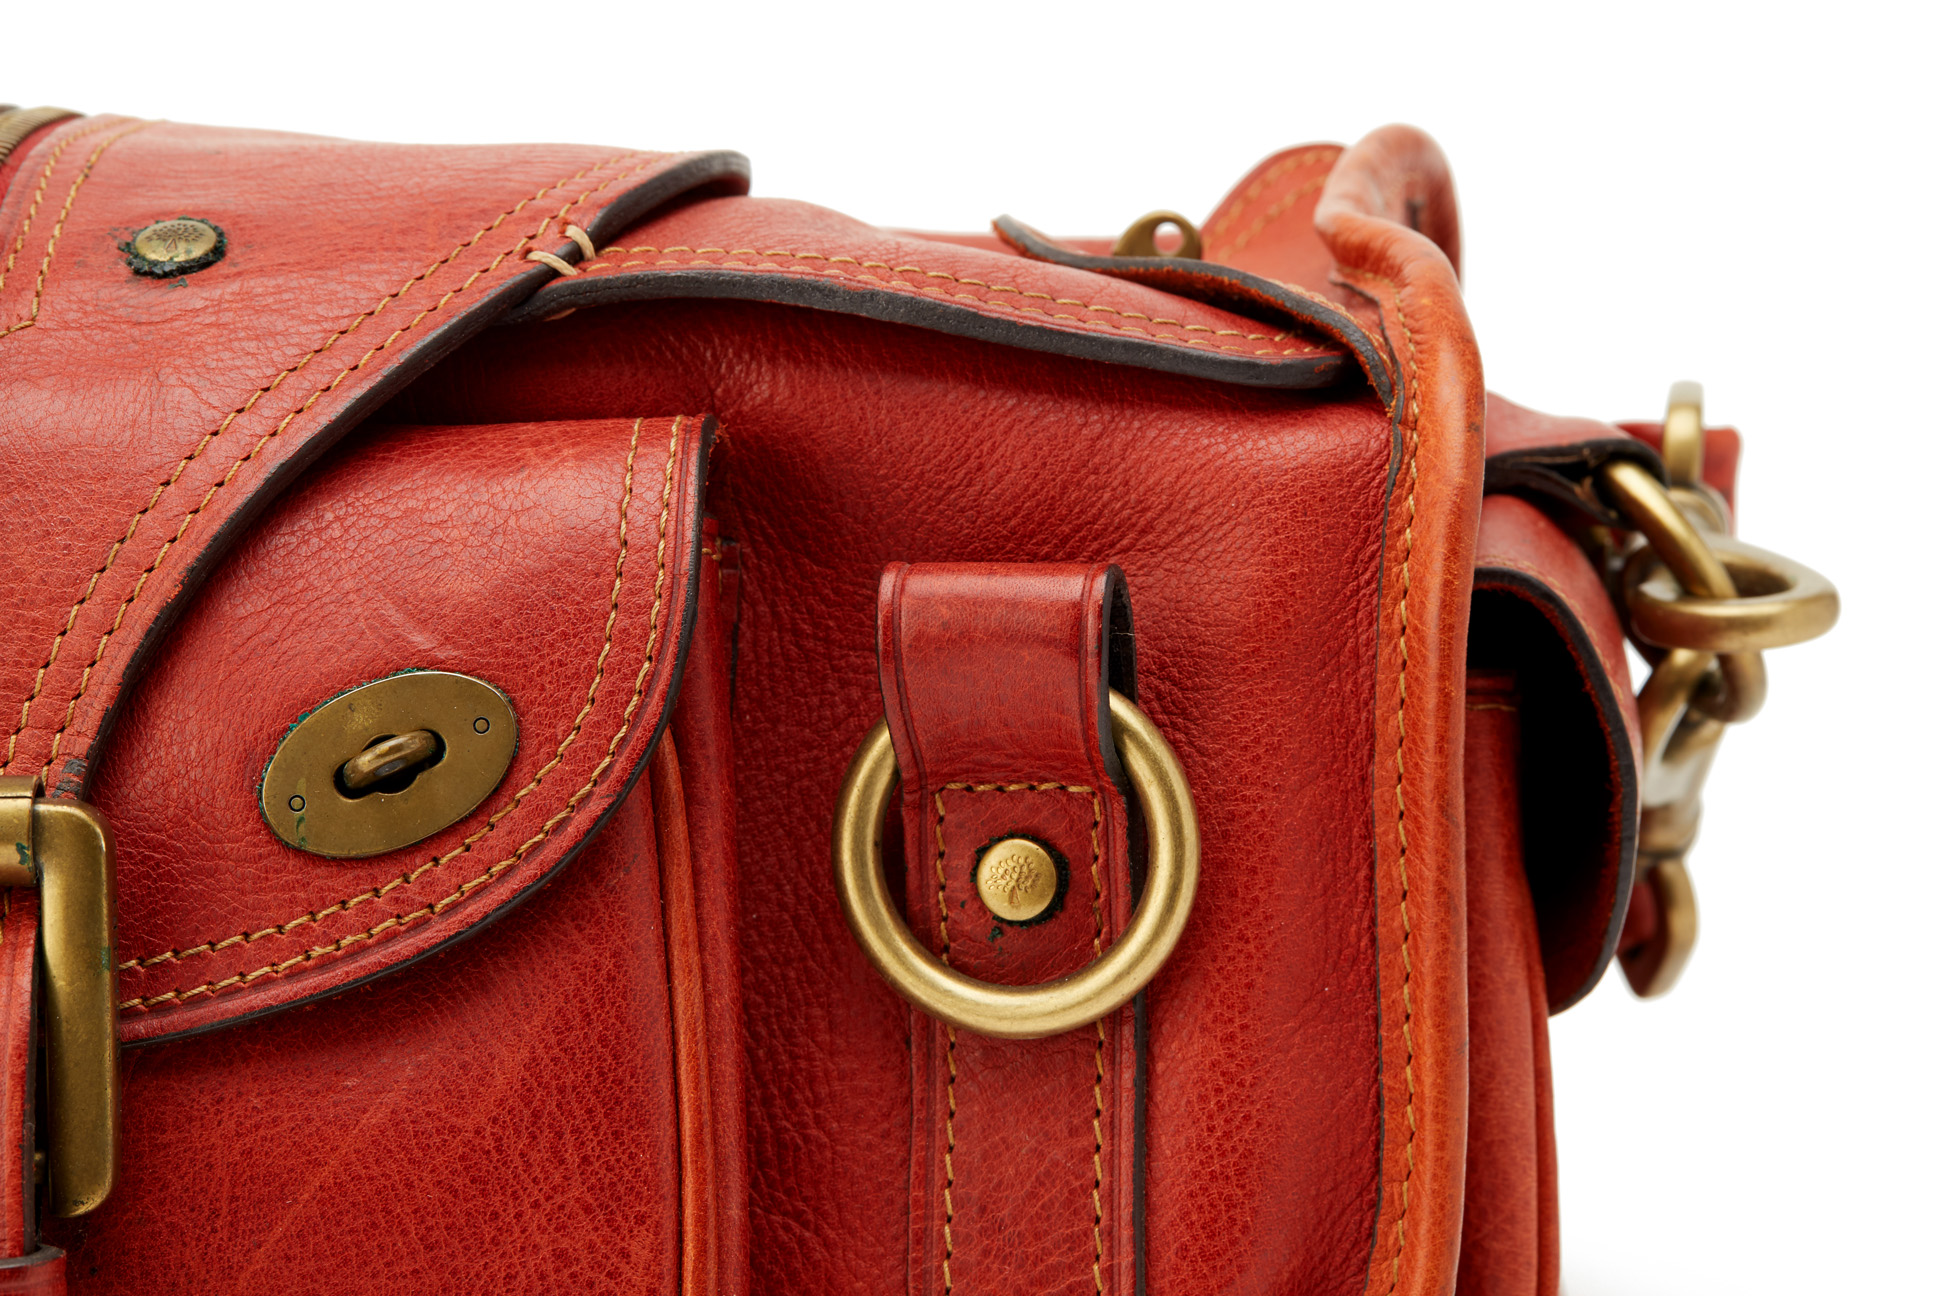 A MULBERRY OX BLOOD RED HANDBAG - Image 2 of 5